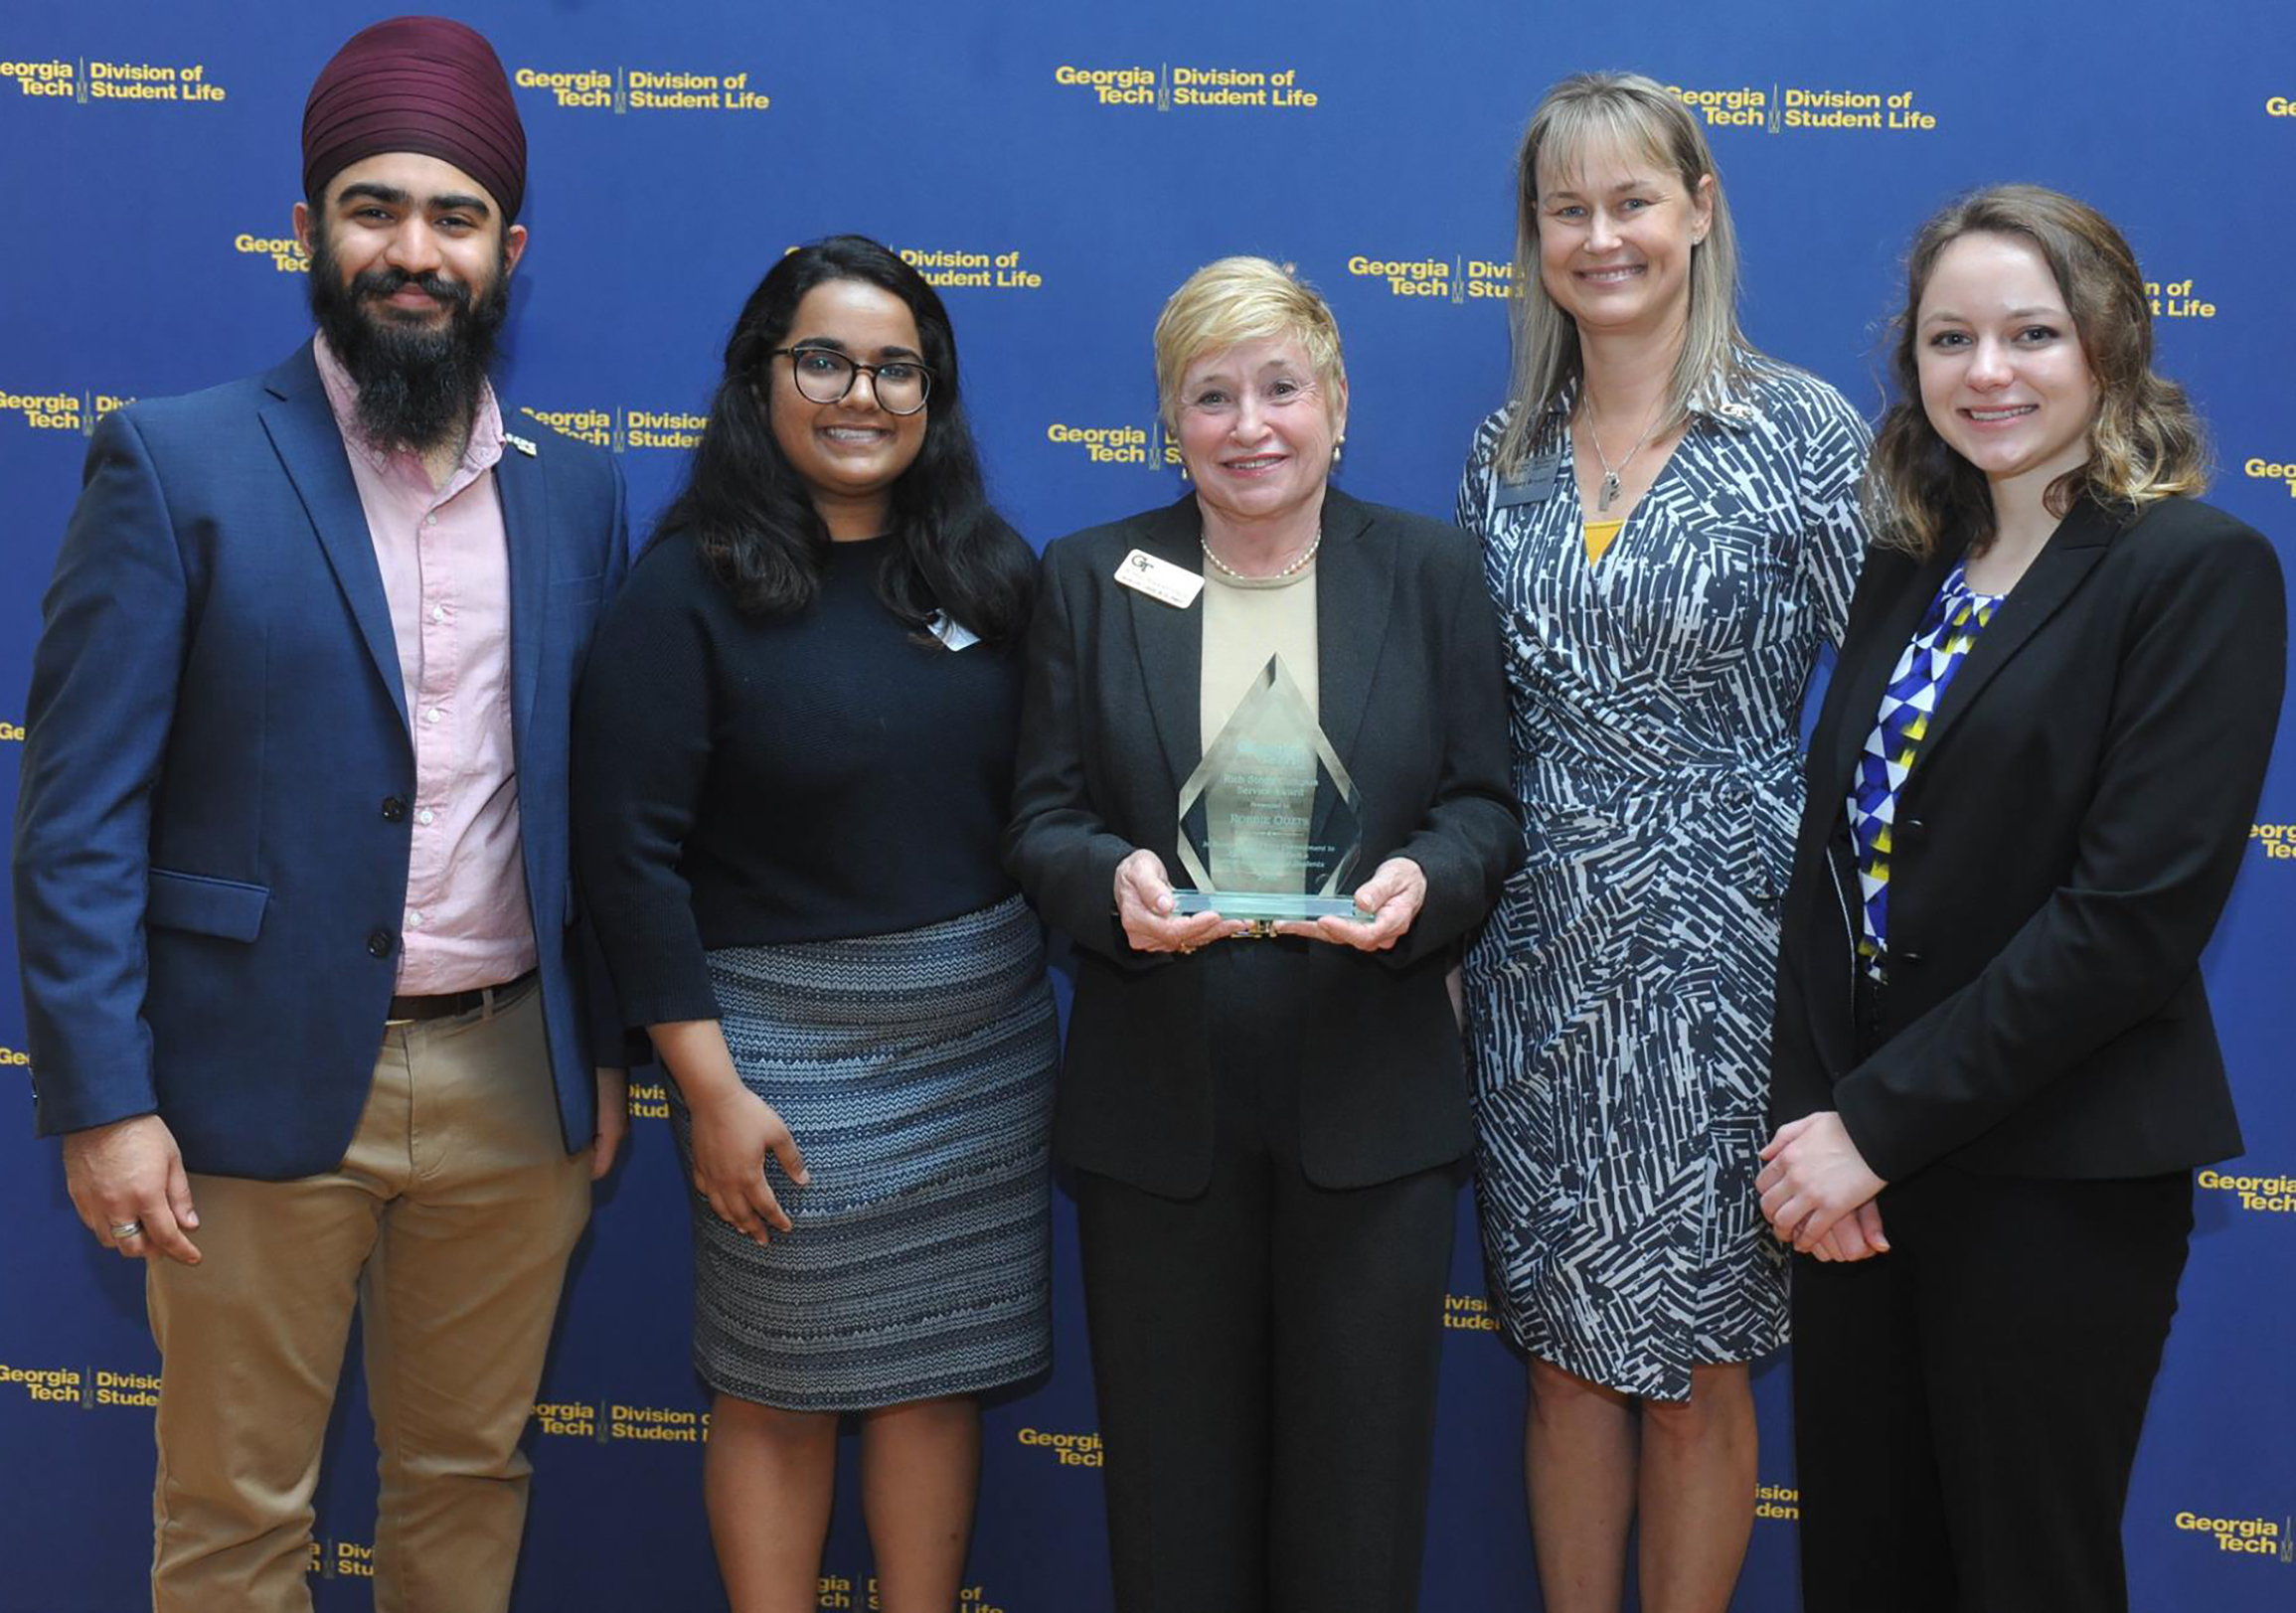 Robbie Ouzts received the 2018 Rich Steele Campus Services Award. Pictured (l-r) are Gurjote Sethi, Student Center Vice President of Finance; Sanjana Basker, Student Center President; Robbie Outzs, 2018 Rich Steele Campus Services award recipient; Lindsay Bryant, Senior Director of the Student Center; and Katie Hampton, Student Center Vice President of Recruitment.